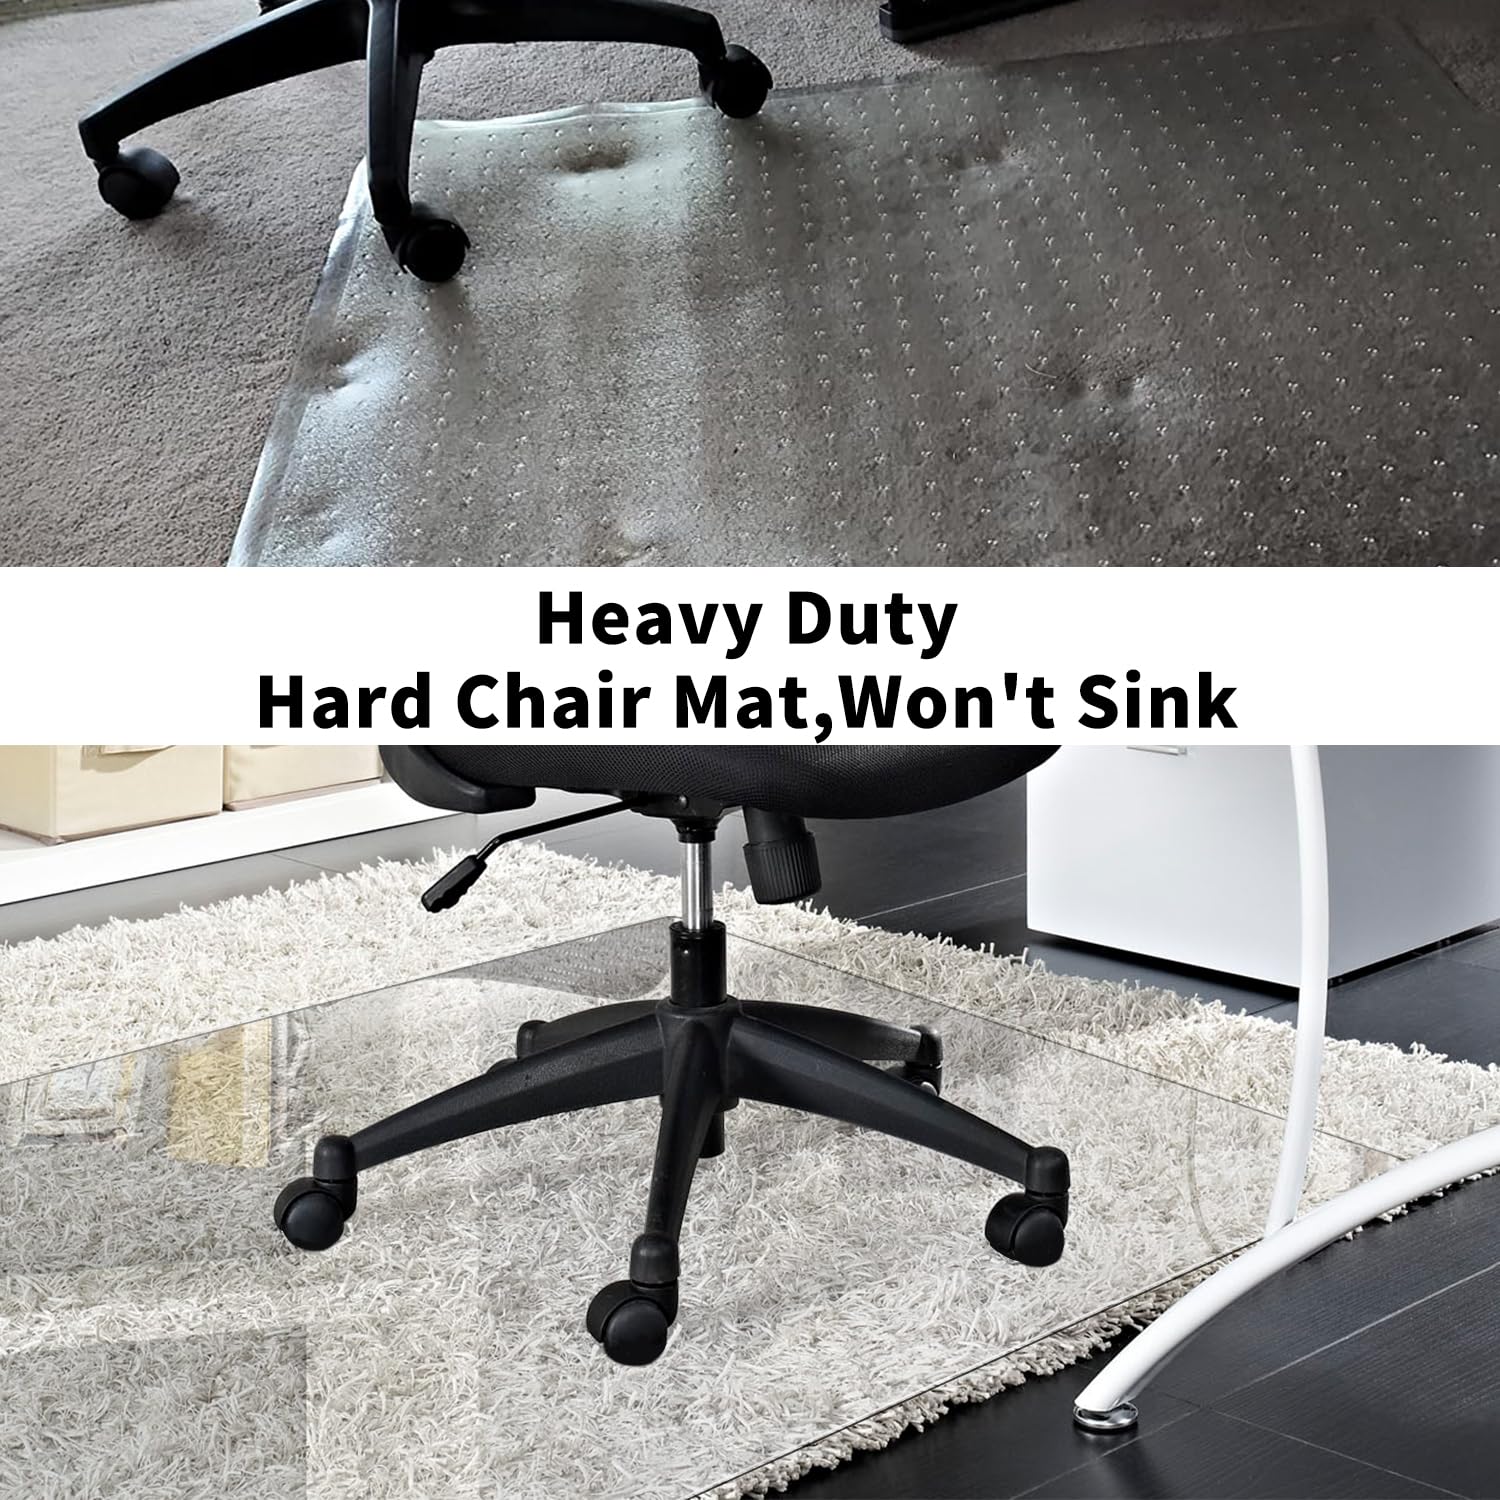 HEADMALL Rolling Chair Mat for Carpet Office Chair Floor Mats for Carpeted Floors 36 x 48 Inches Rectangle Clear Heavy Duty 0.14 Inches Thick (48x36 Inches)